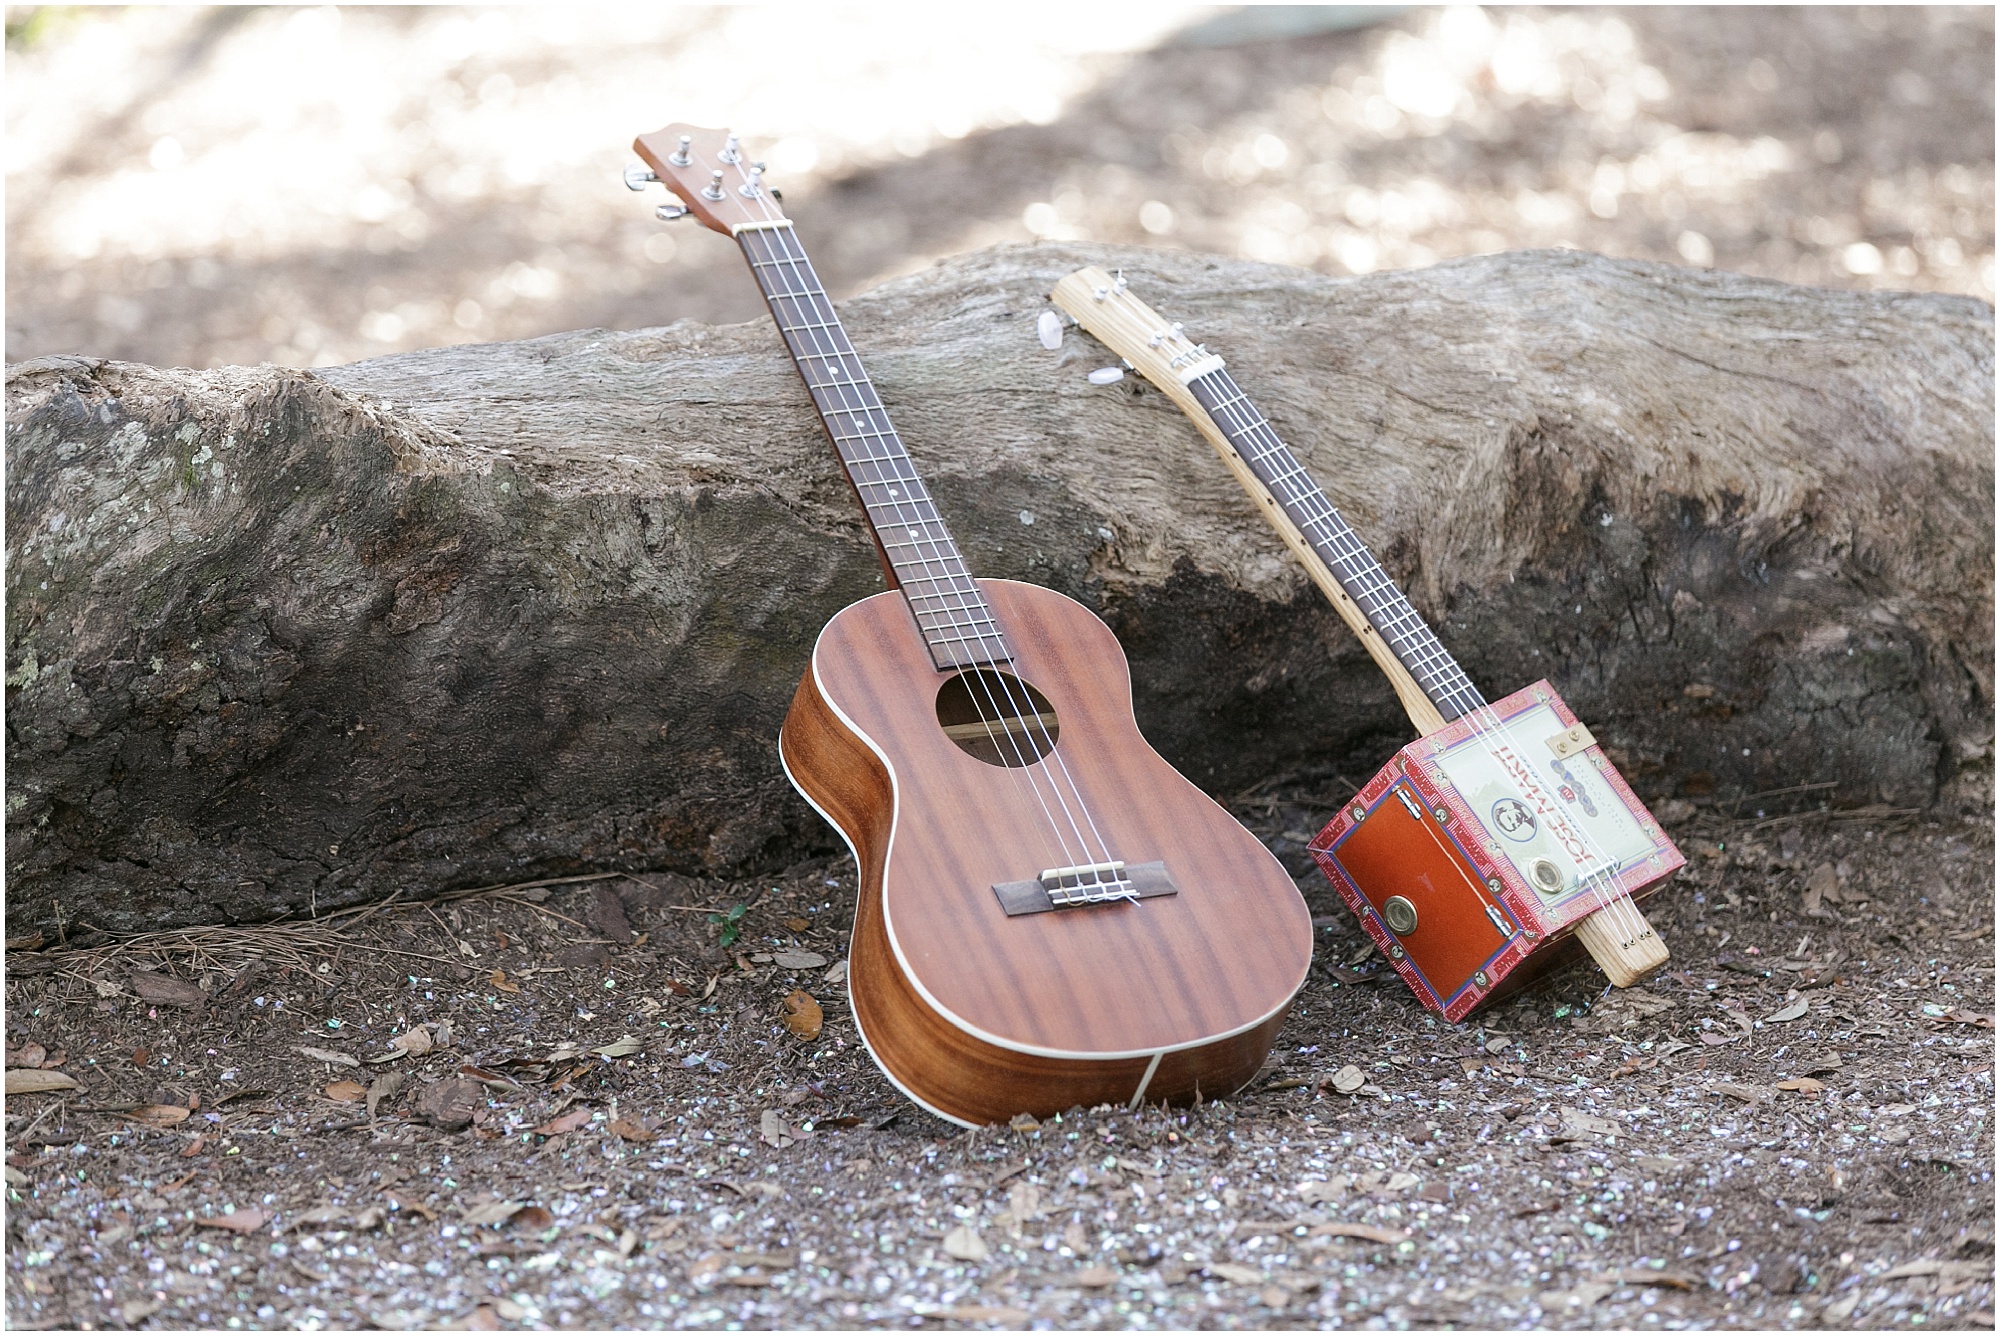 Musical Outdoor Engagement Session guitar and handmade ukulele laying on the ground